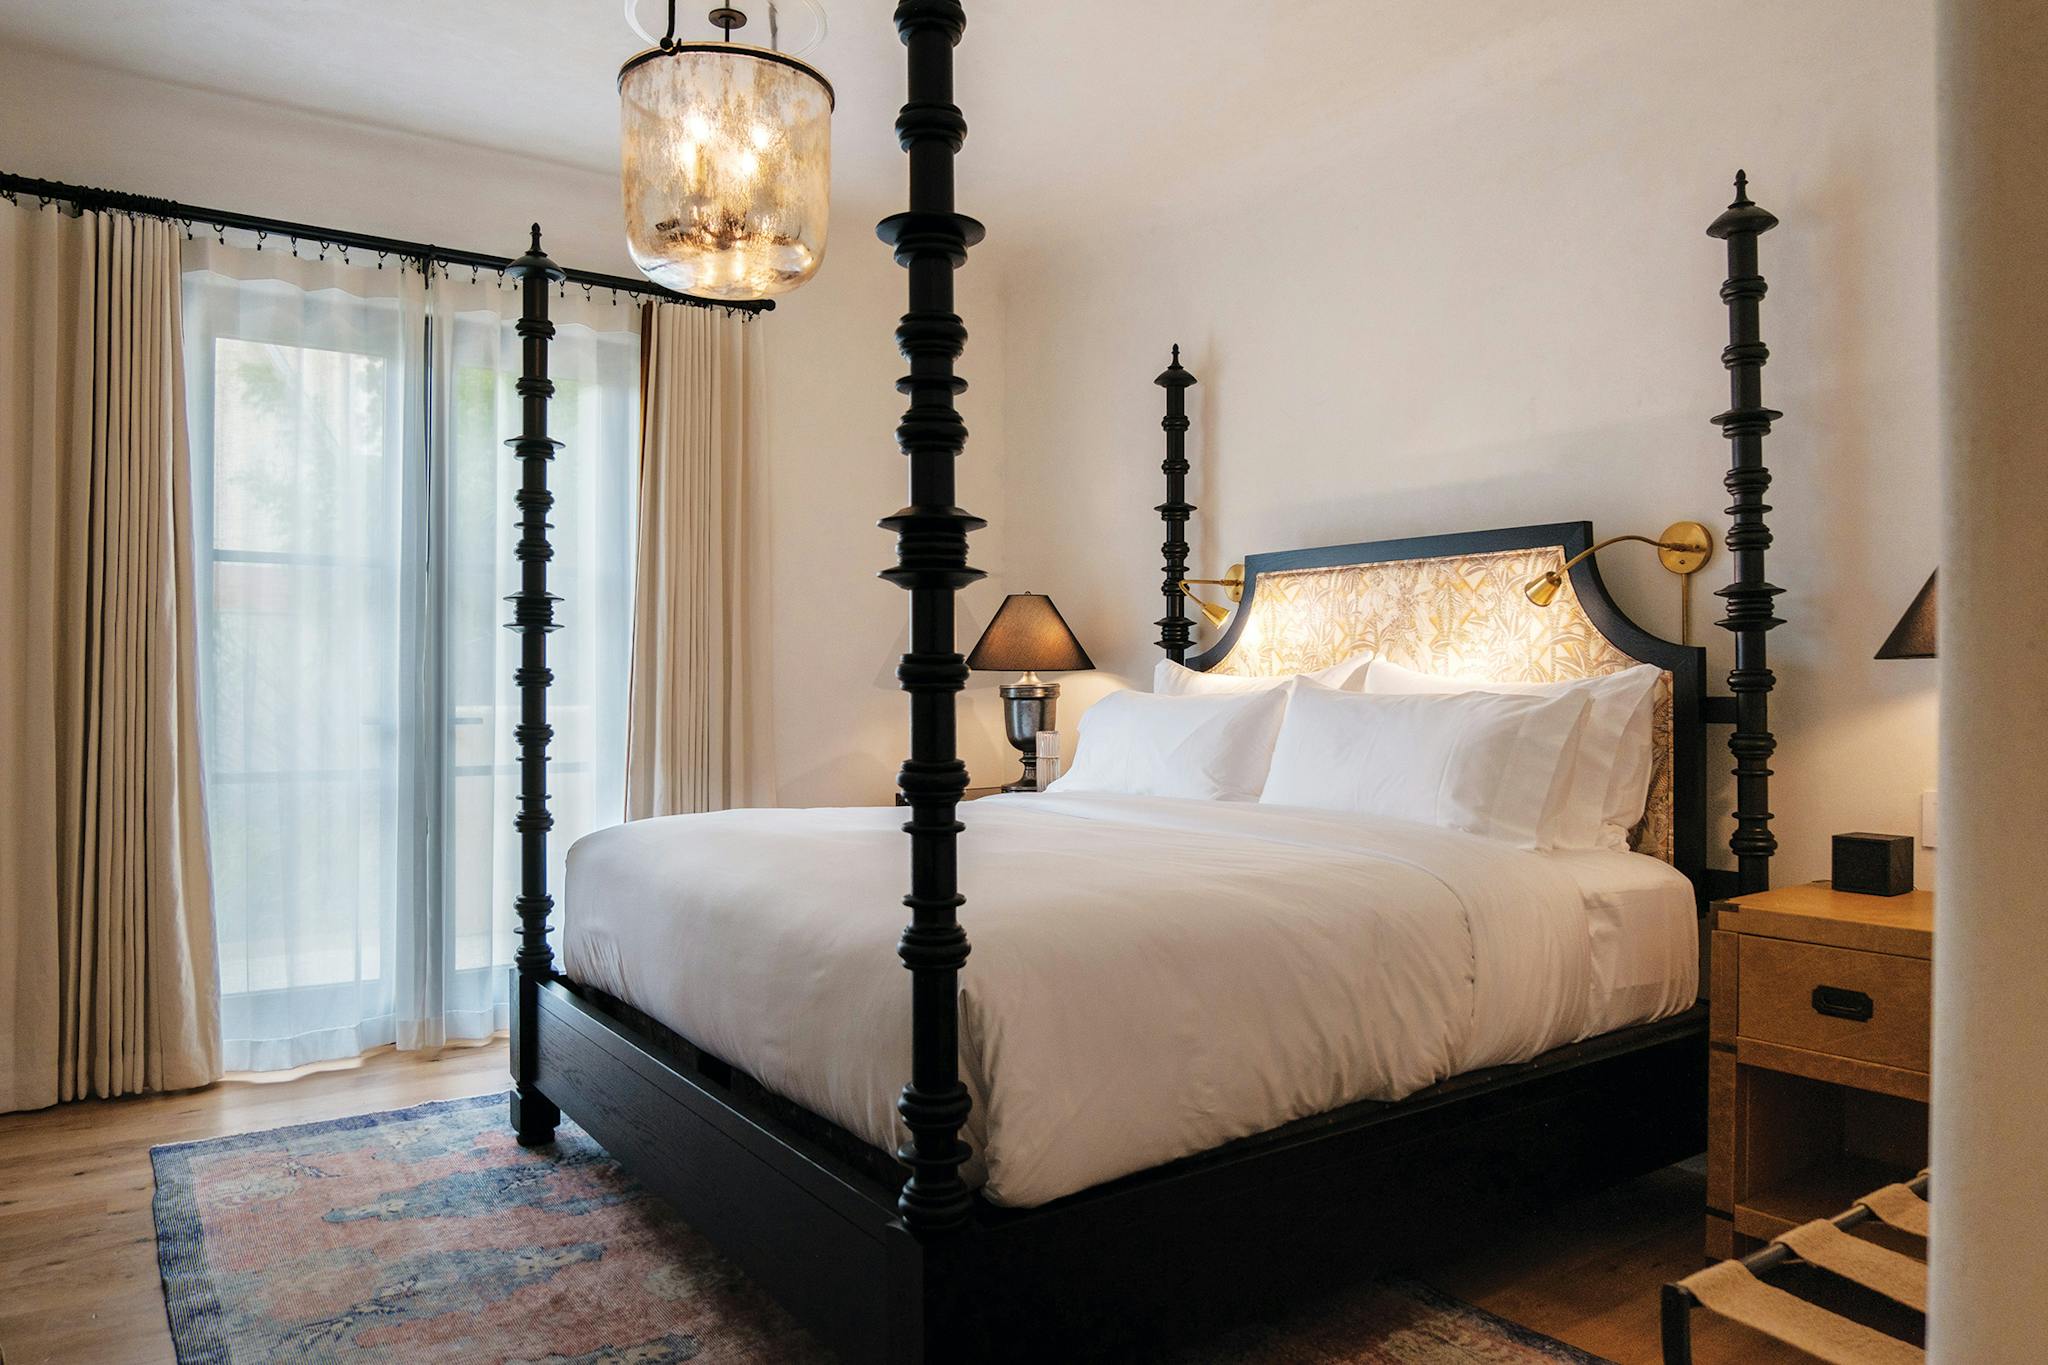 In the Inn, softly curved ceilings, rough-hewn walls, and antique light fixtures give the 42 new rooms the same European-villa vibes as the main house. In true Austin fashion, some suites are accessible outdoors, via their own outdoor terraces.